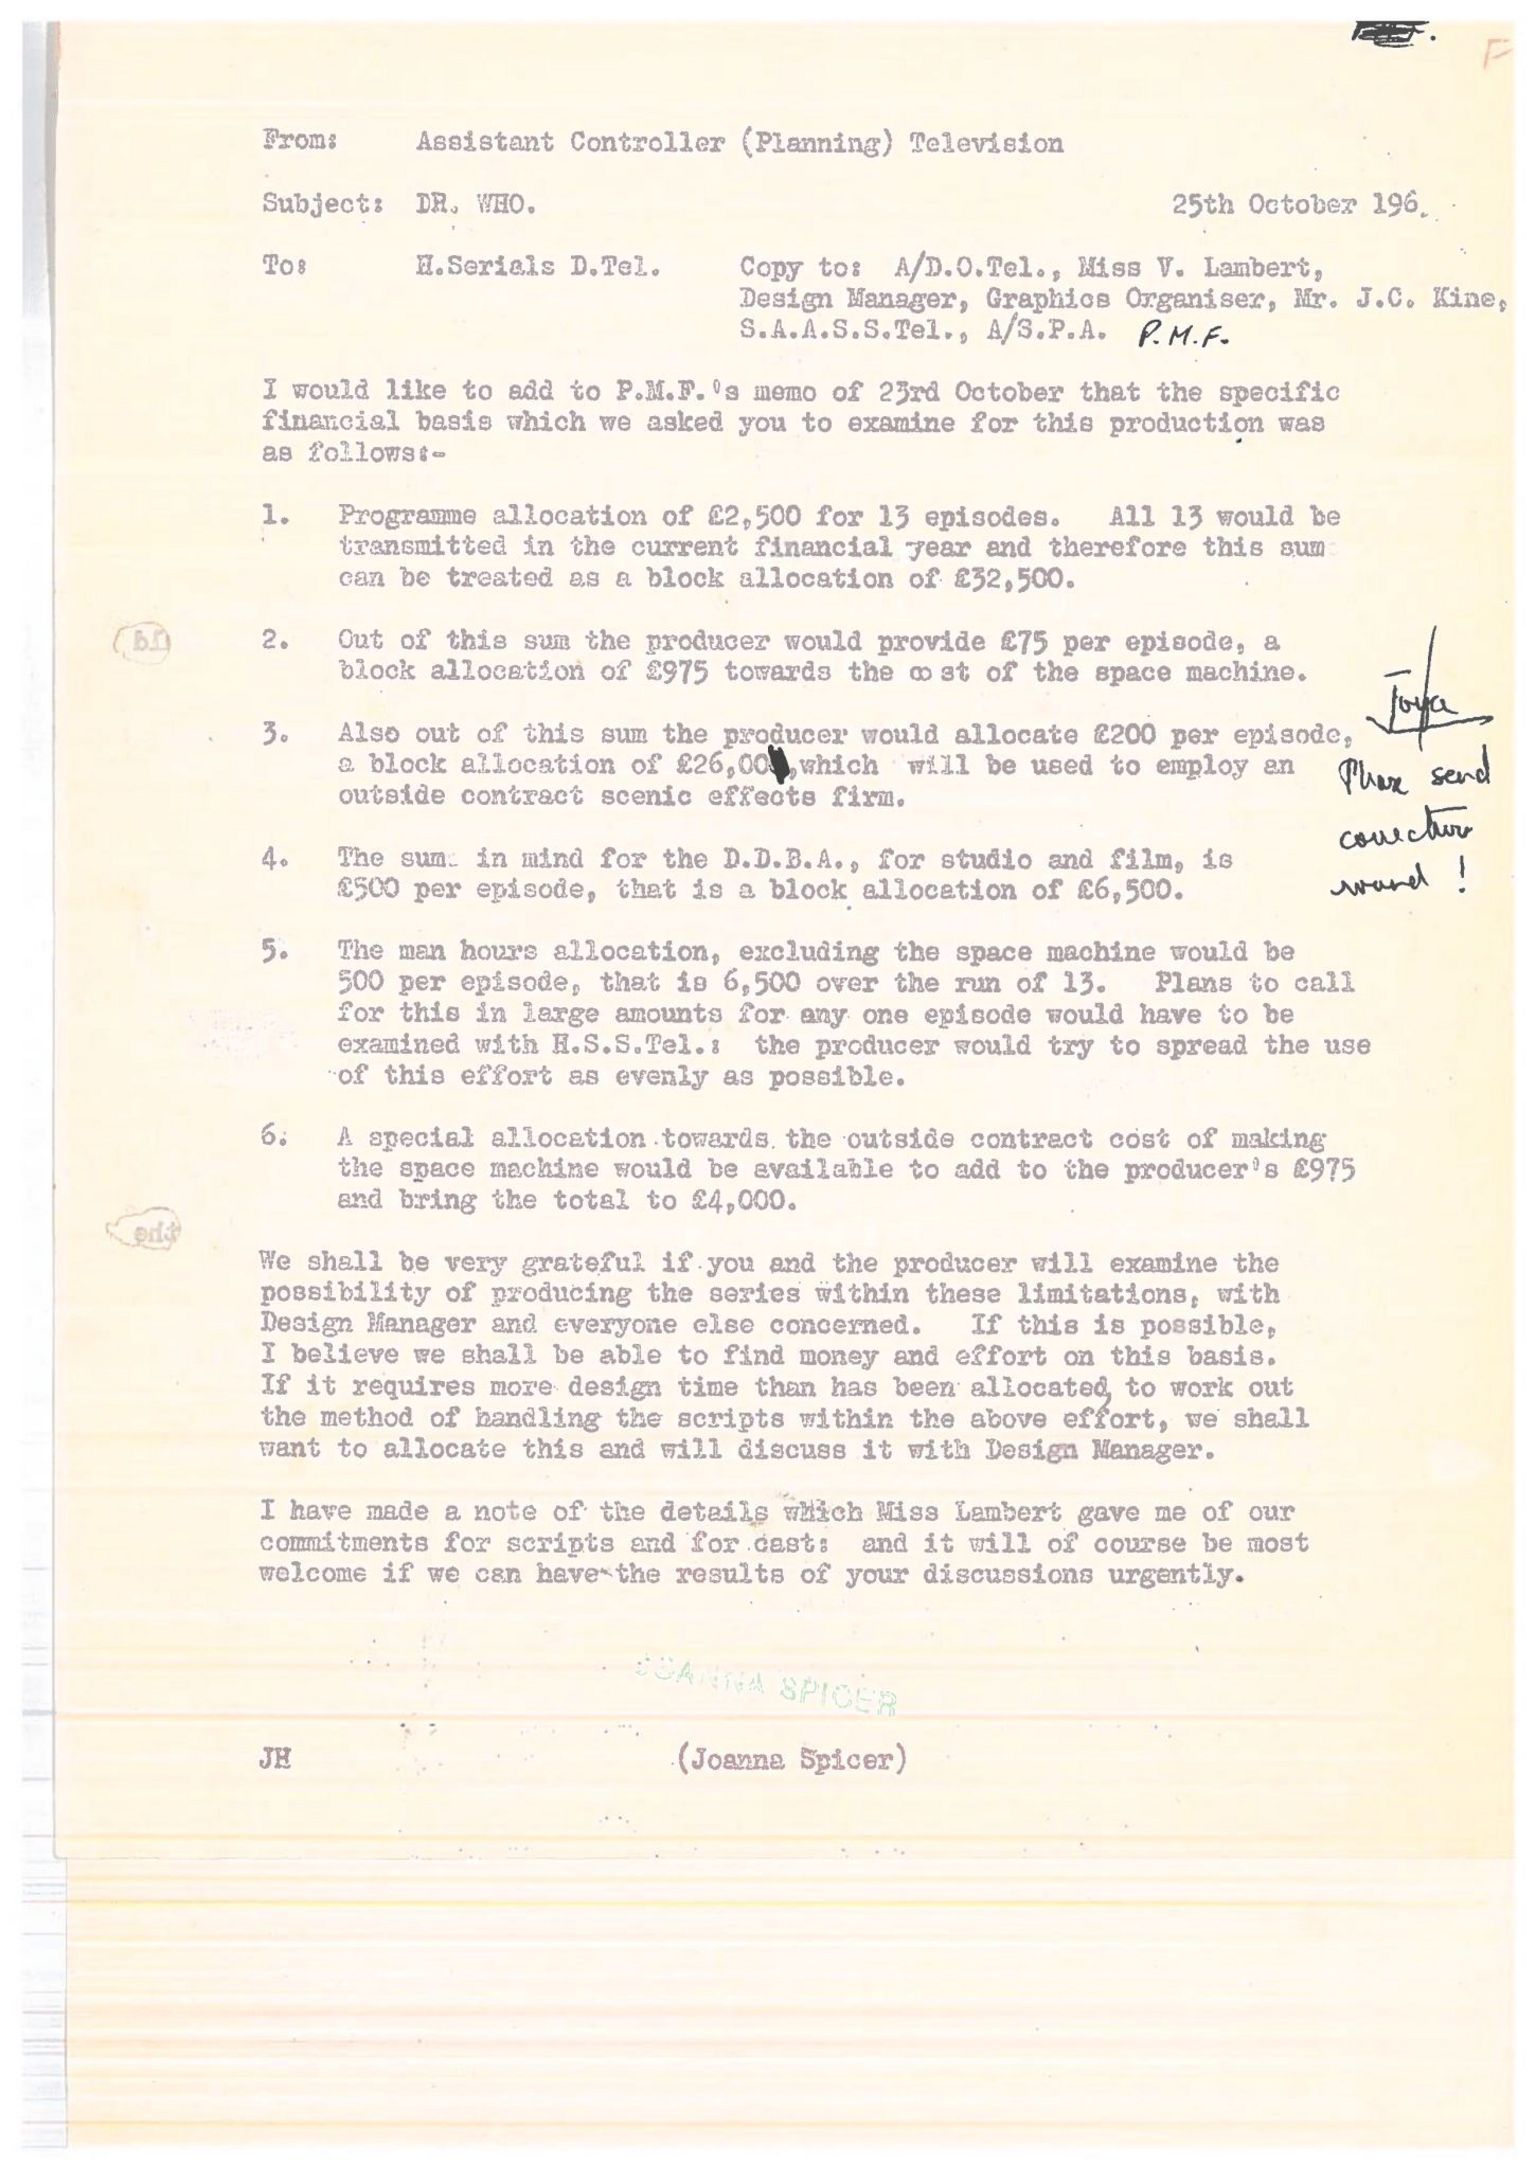 A letter dated the 25th October 1963 from Assistant Controller of Television, Joanna Spicer